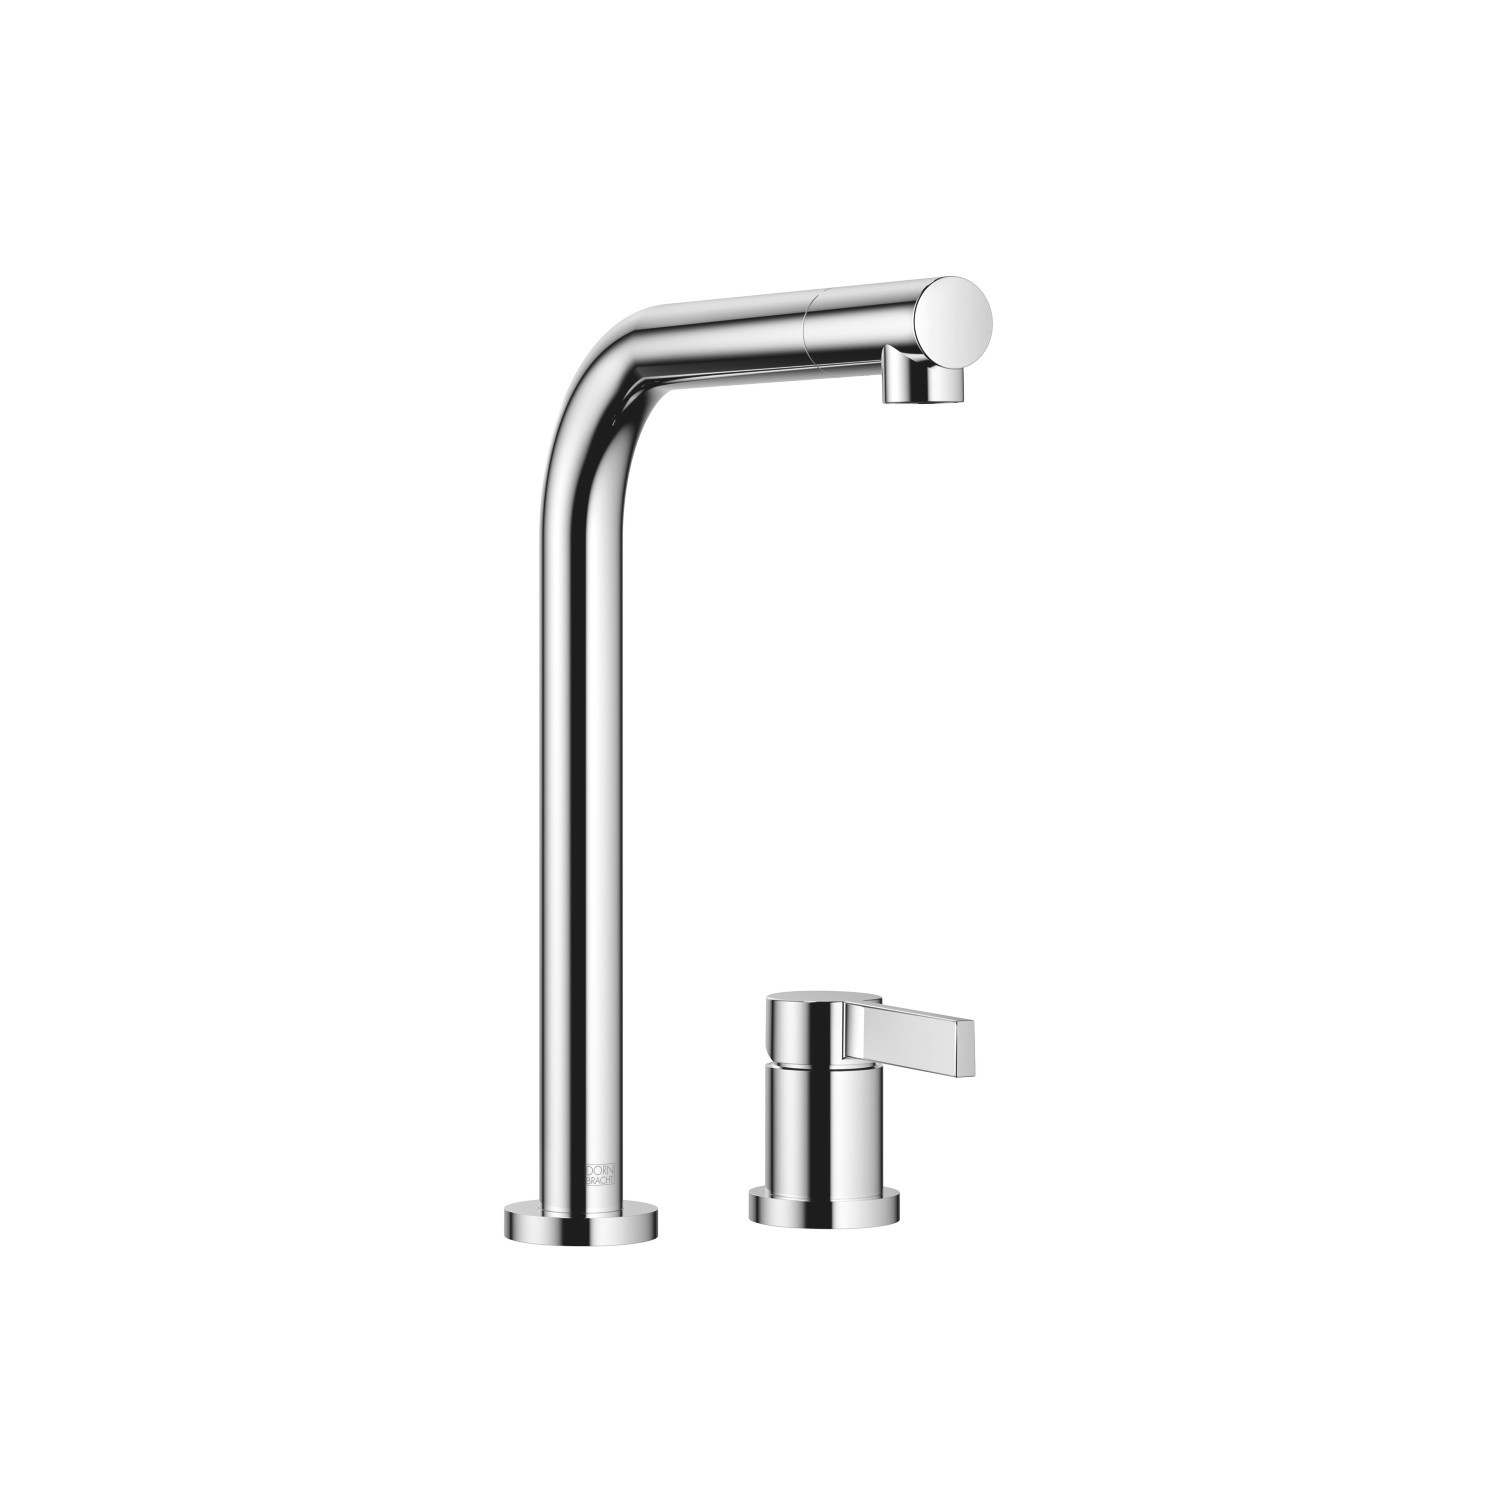 DORNBRACHT 32800790-0010 ELIO TWO HOLES DECK MOUNT KITCHEN FAUCET WITH INDIVIDUAL FLANGES AND LEVER HANDLES